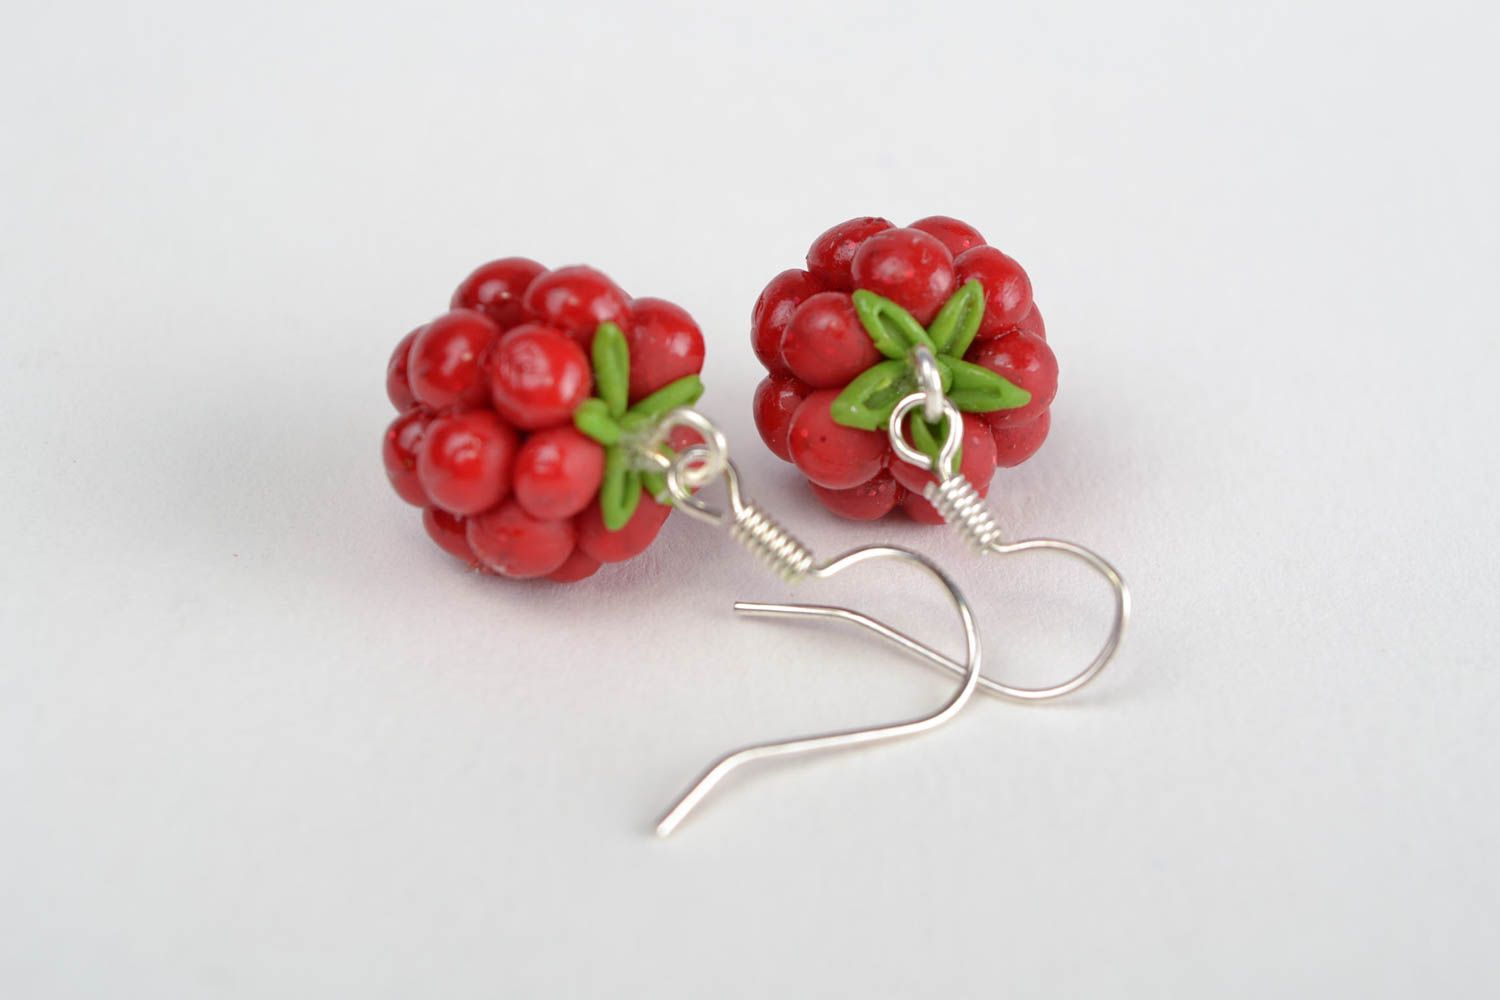 Handmade designer cute polymer clay earrings in the shape of red raspberry photo 3